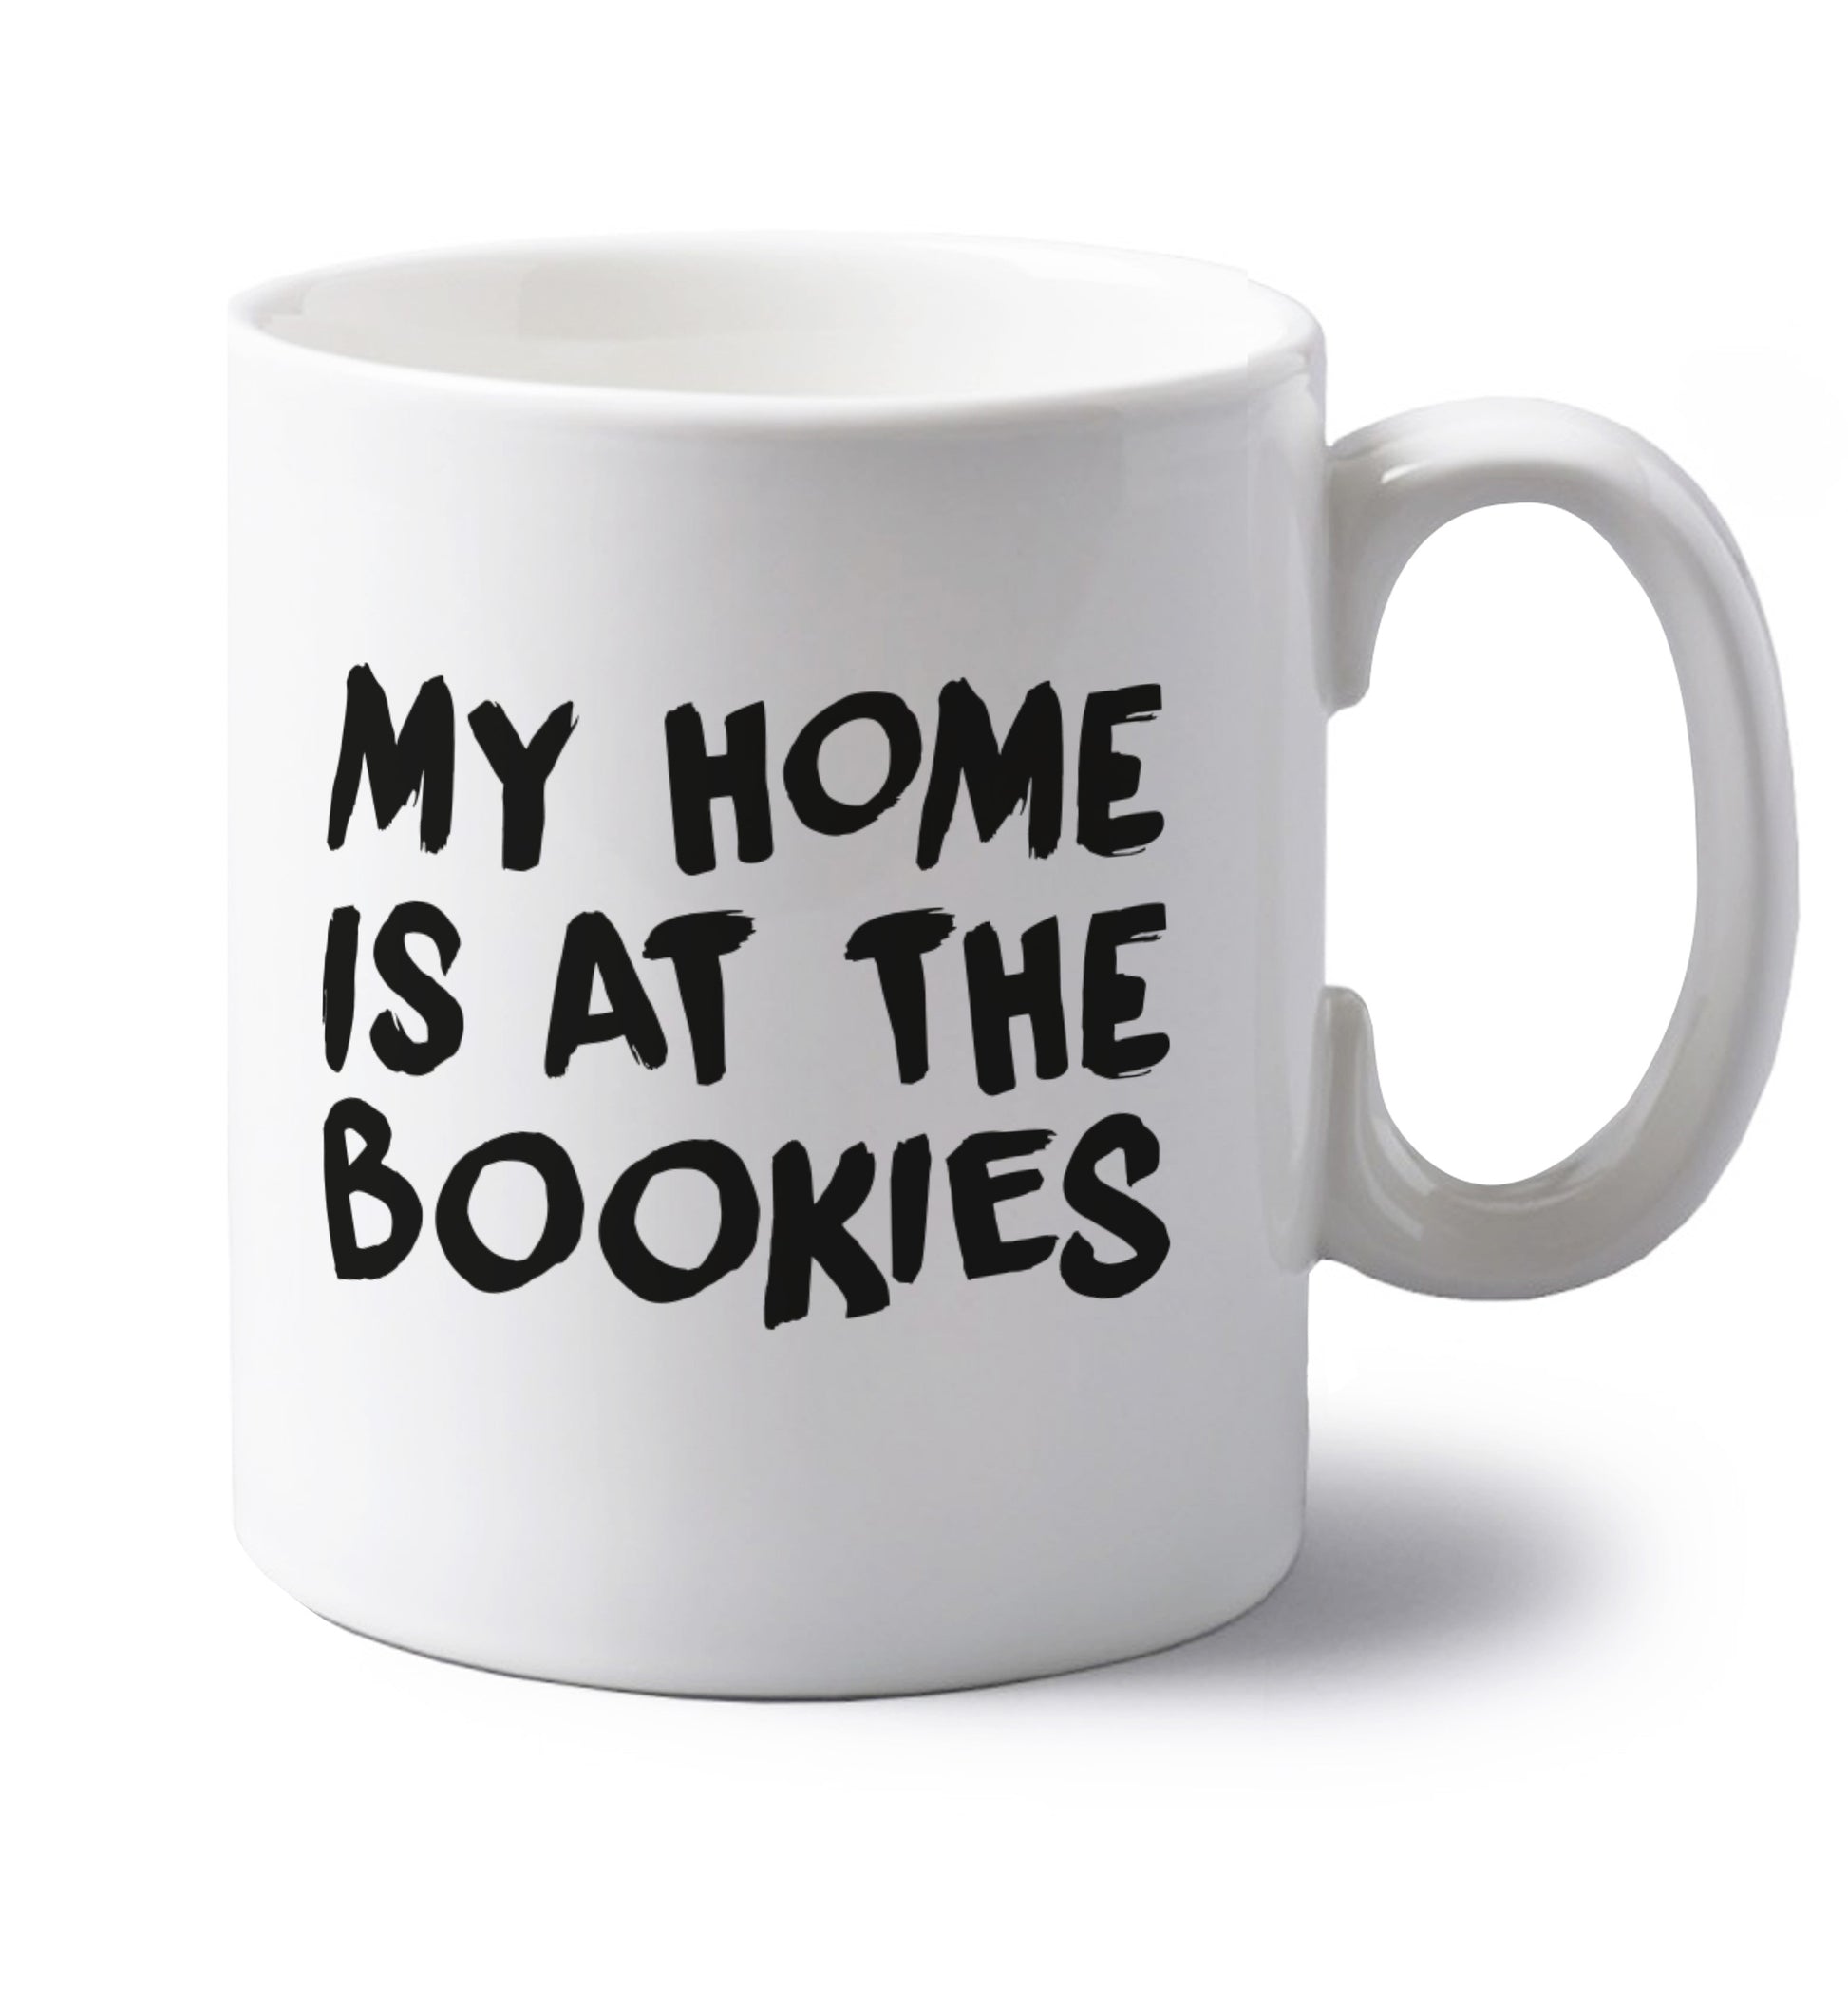 My home is at the bookies left handed white ceramic mug 